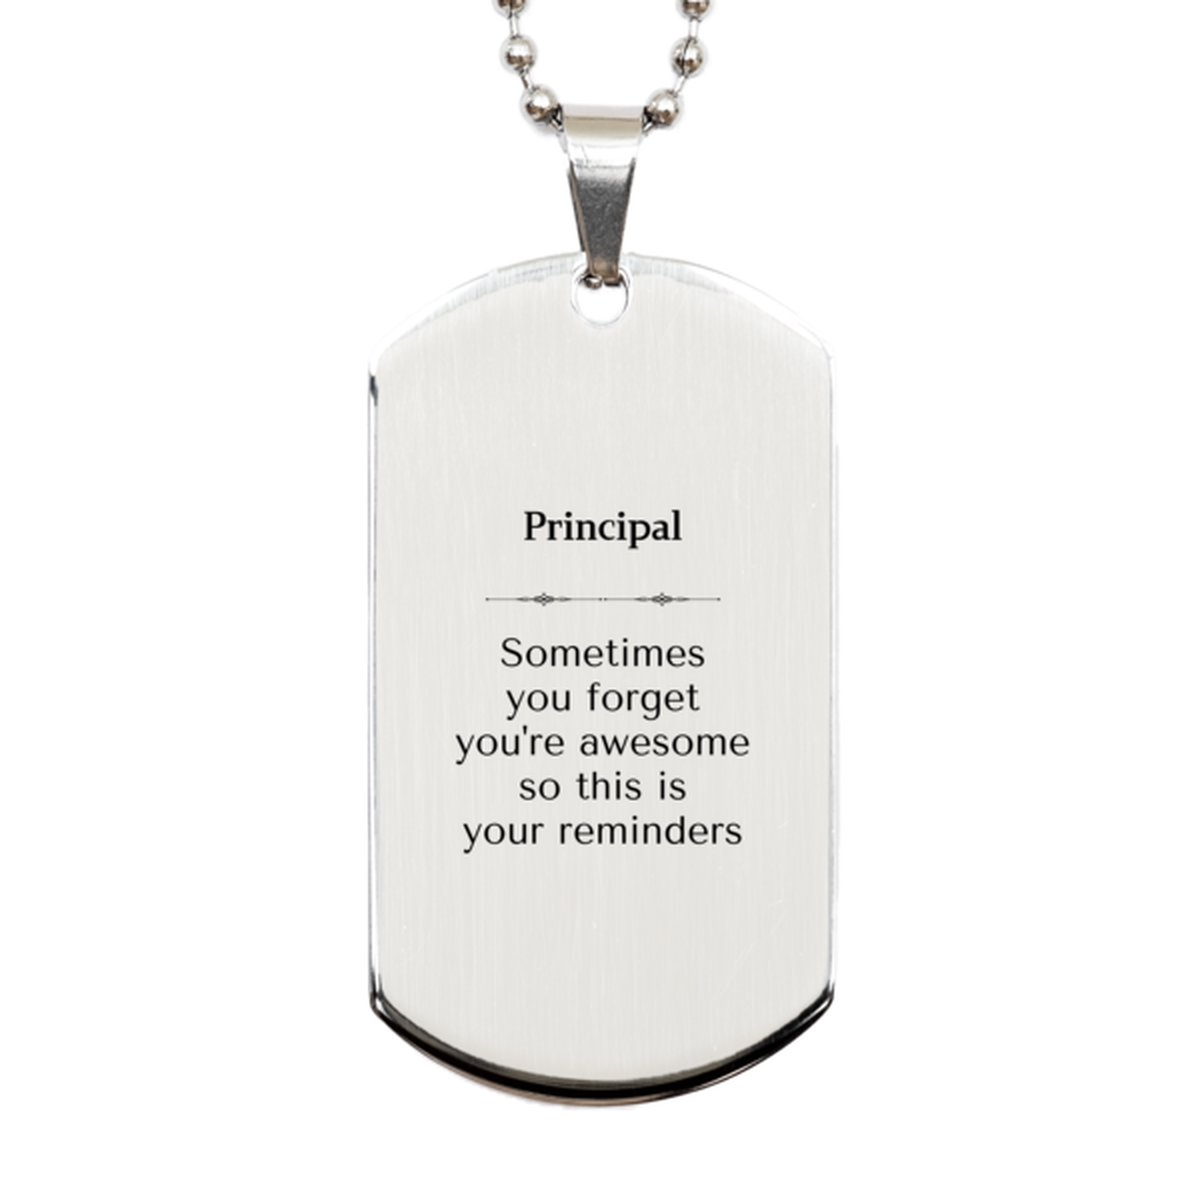 Sentimental Principal Silver Dog Tag, Principal Sometimes you forget you're awesome so this is your reminders, Graduation Christmas Birthday Gifts for Principal, Men, Women, Coworkers